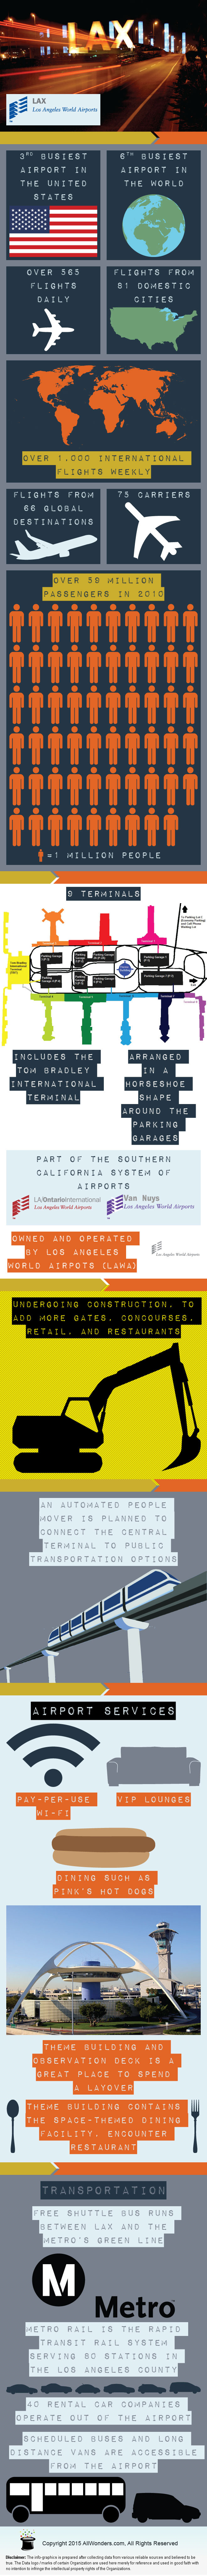 Los Angeles International Airport - Facts & Infographic